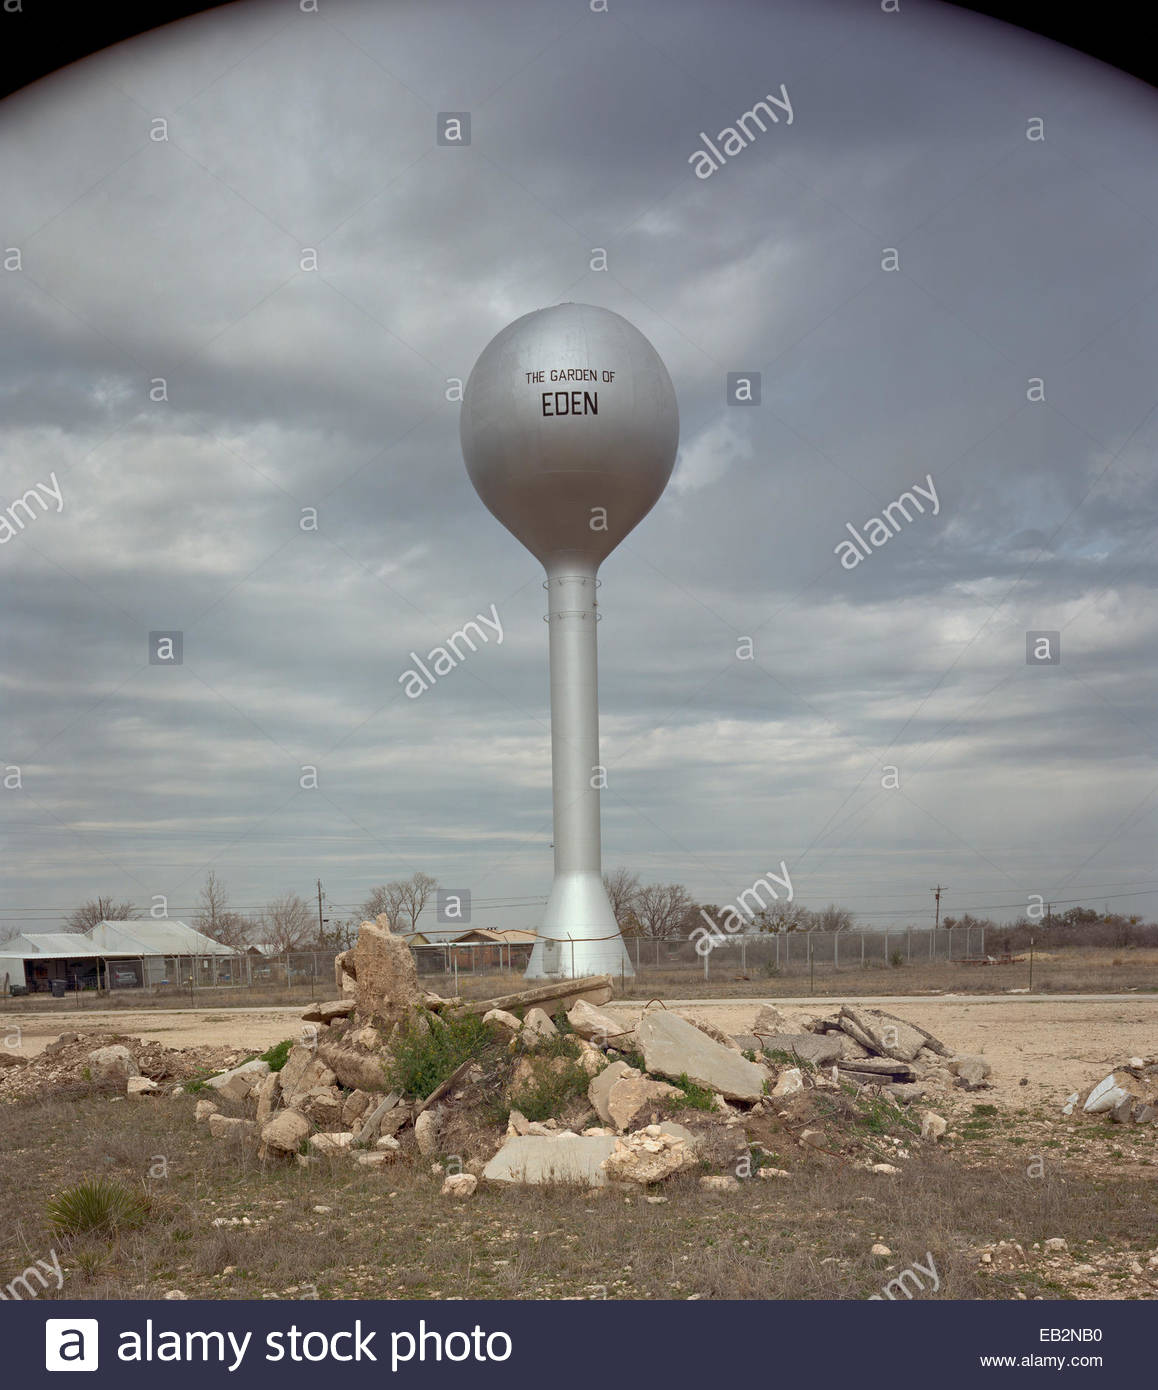 The Water Tower In Eden Texas Stock Photo 75663364 Alamy